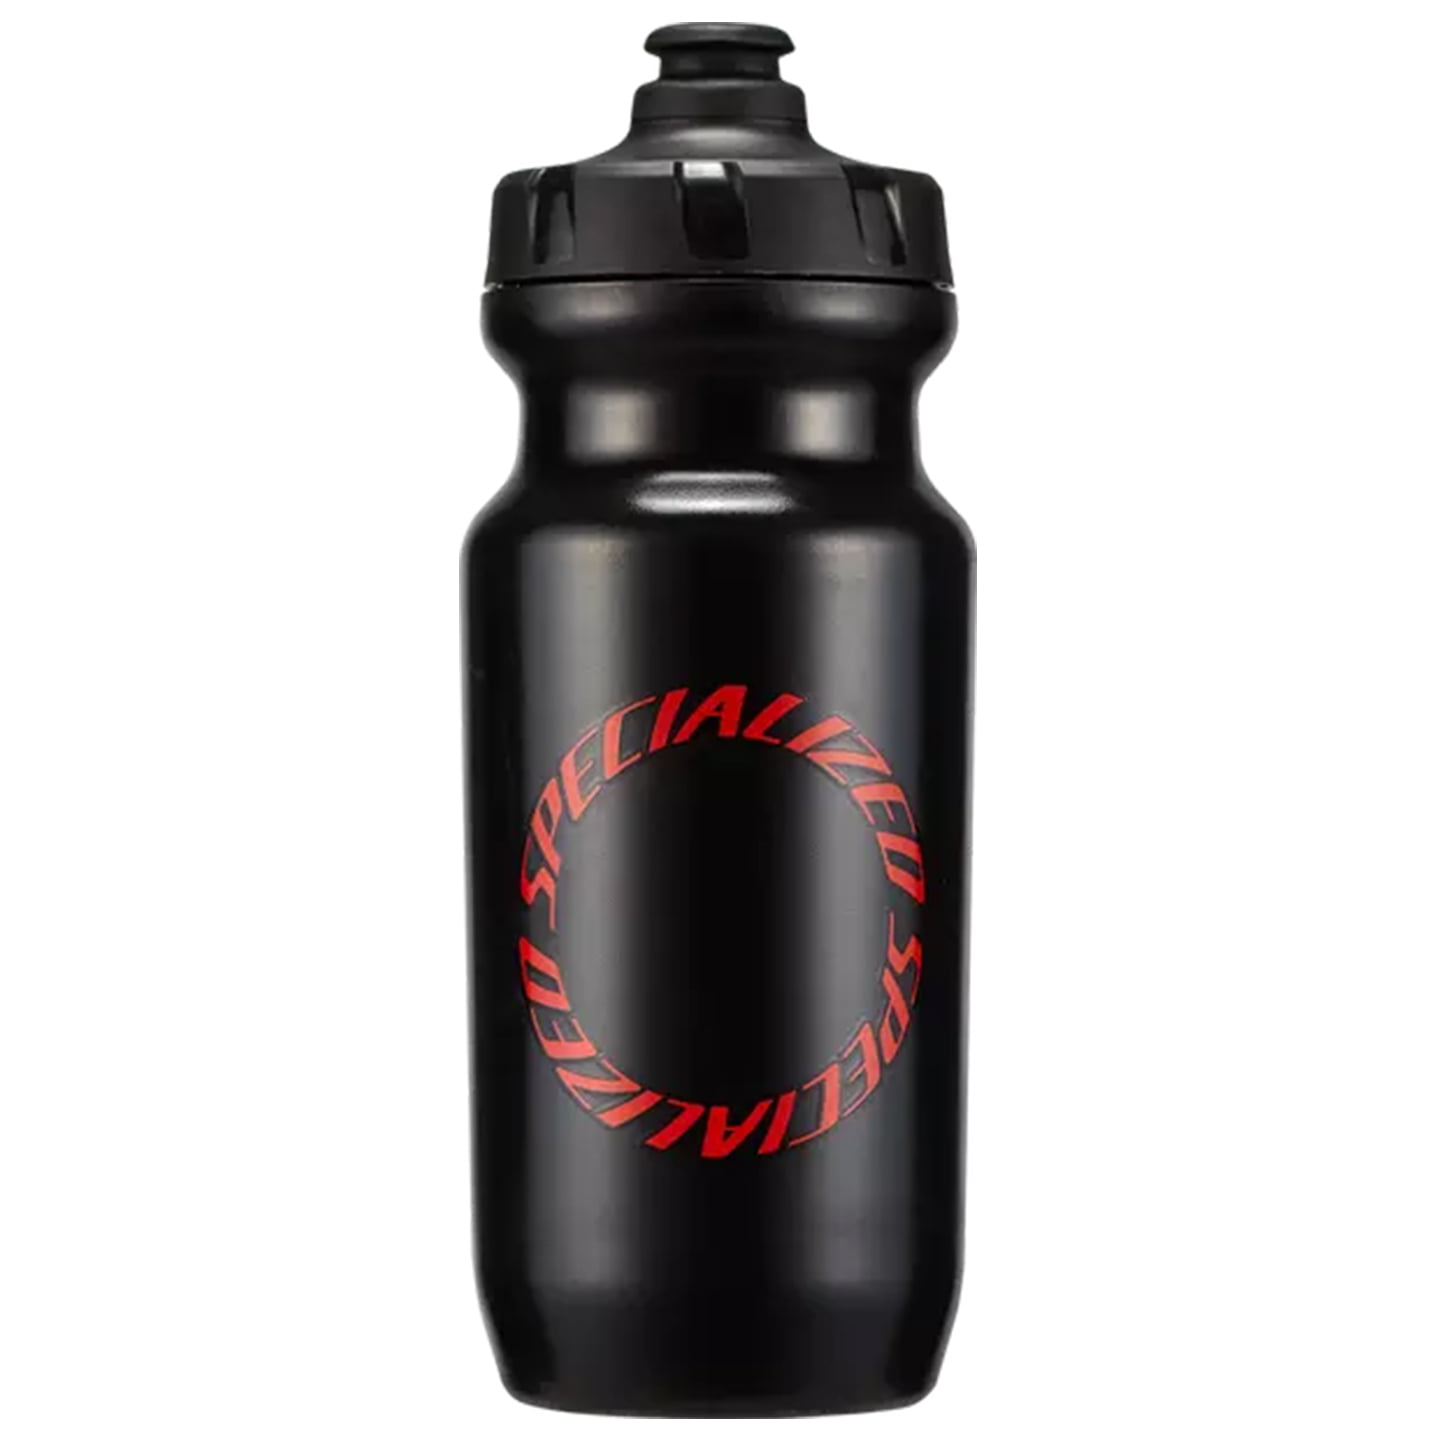 SPECIALIZED Little Big Mouth 620 ml Water Bottle Water Bottle, Bike bottle, Bike accessories